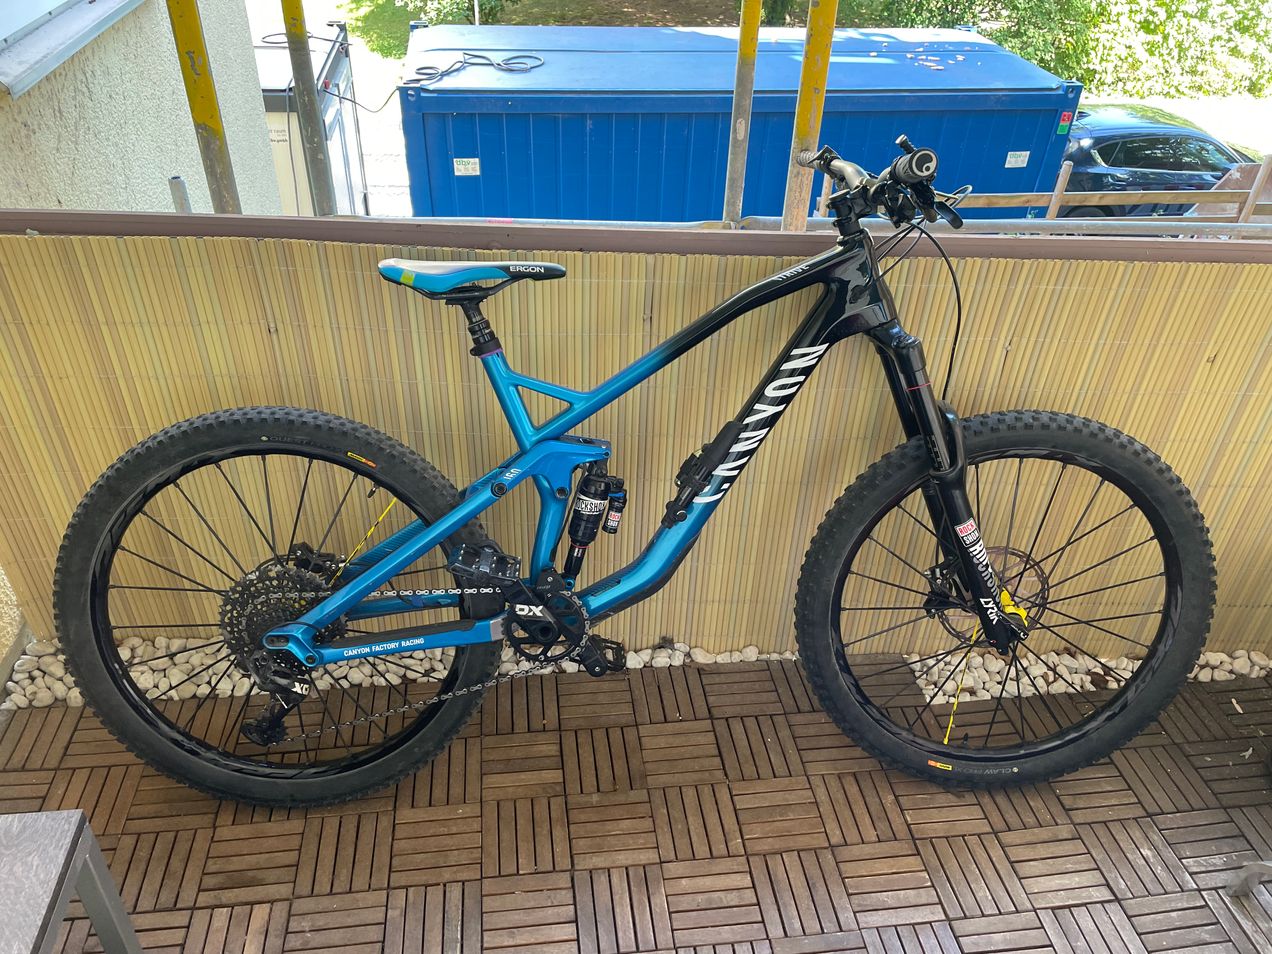 Canyon Strive CF 9.0 Team used in L | buycycle